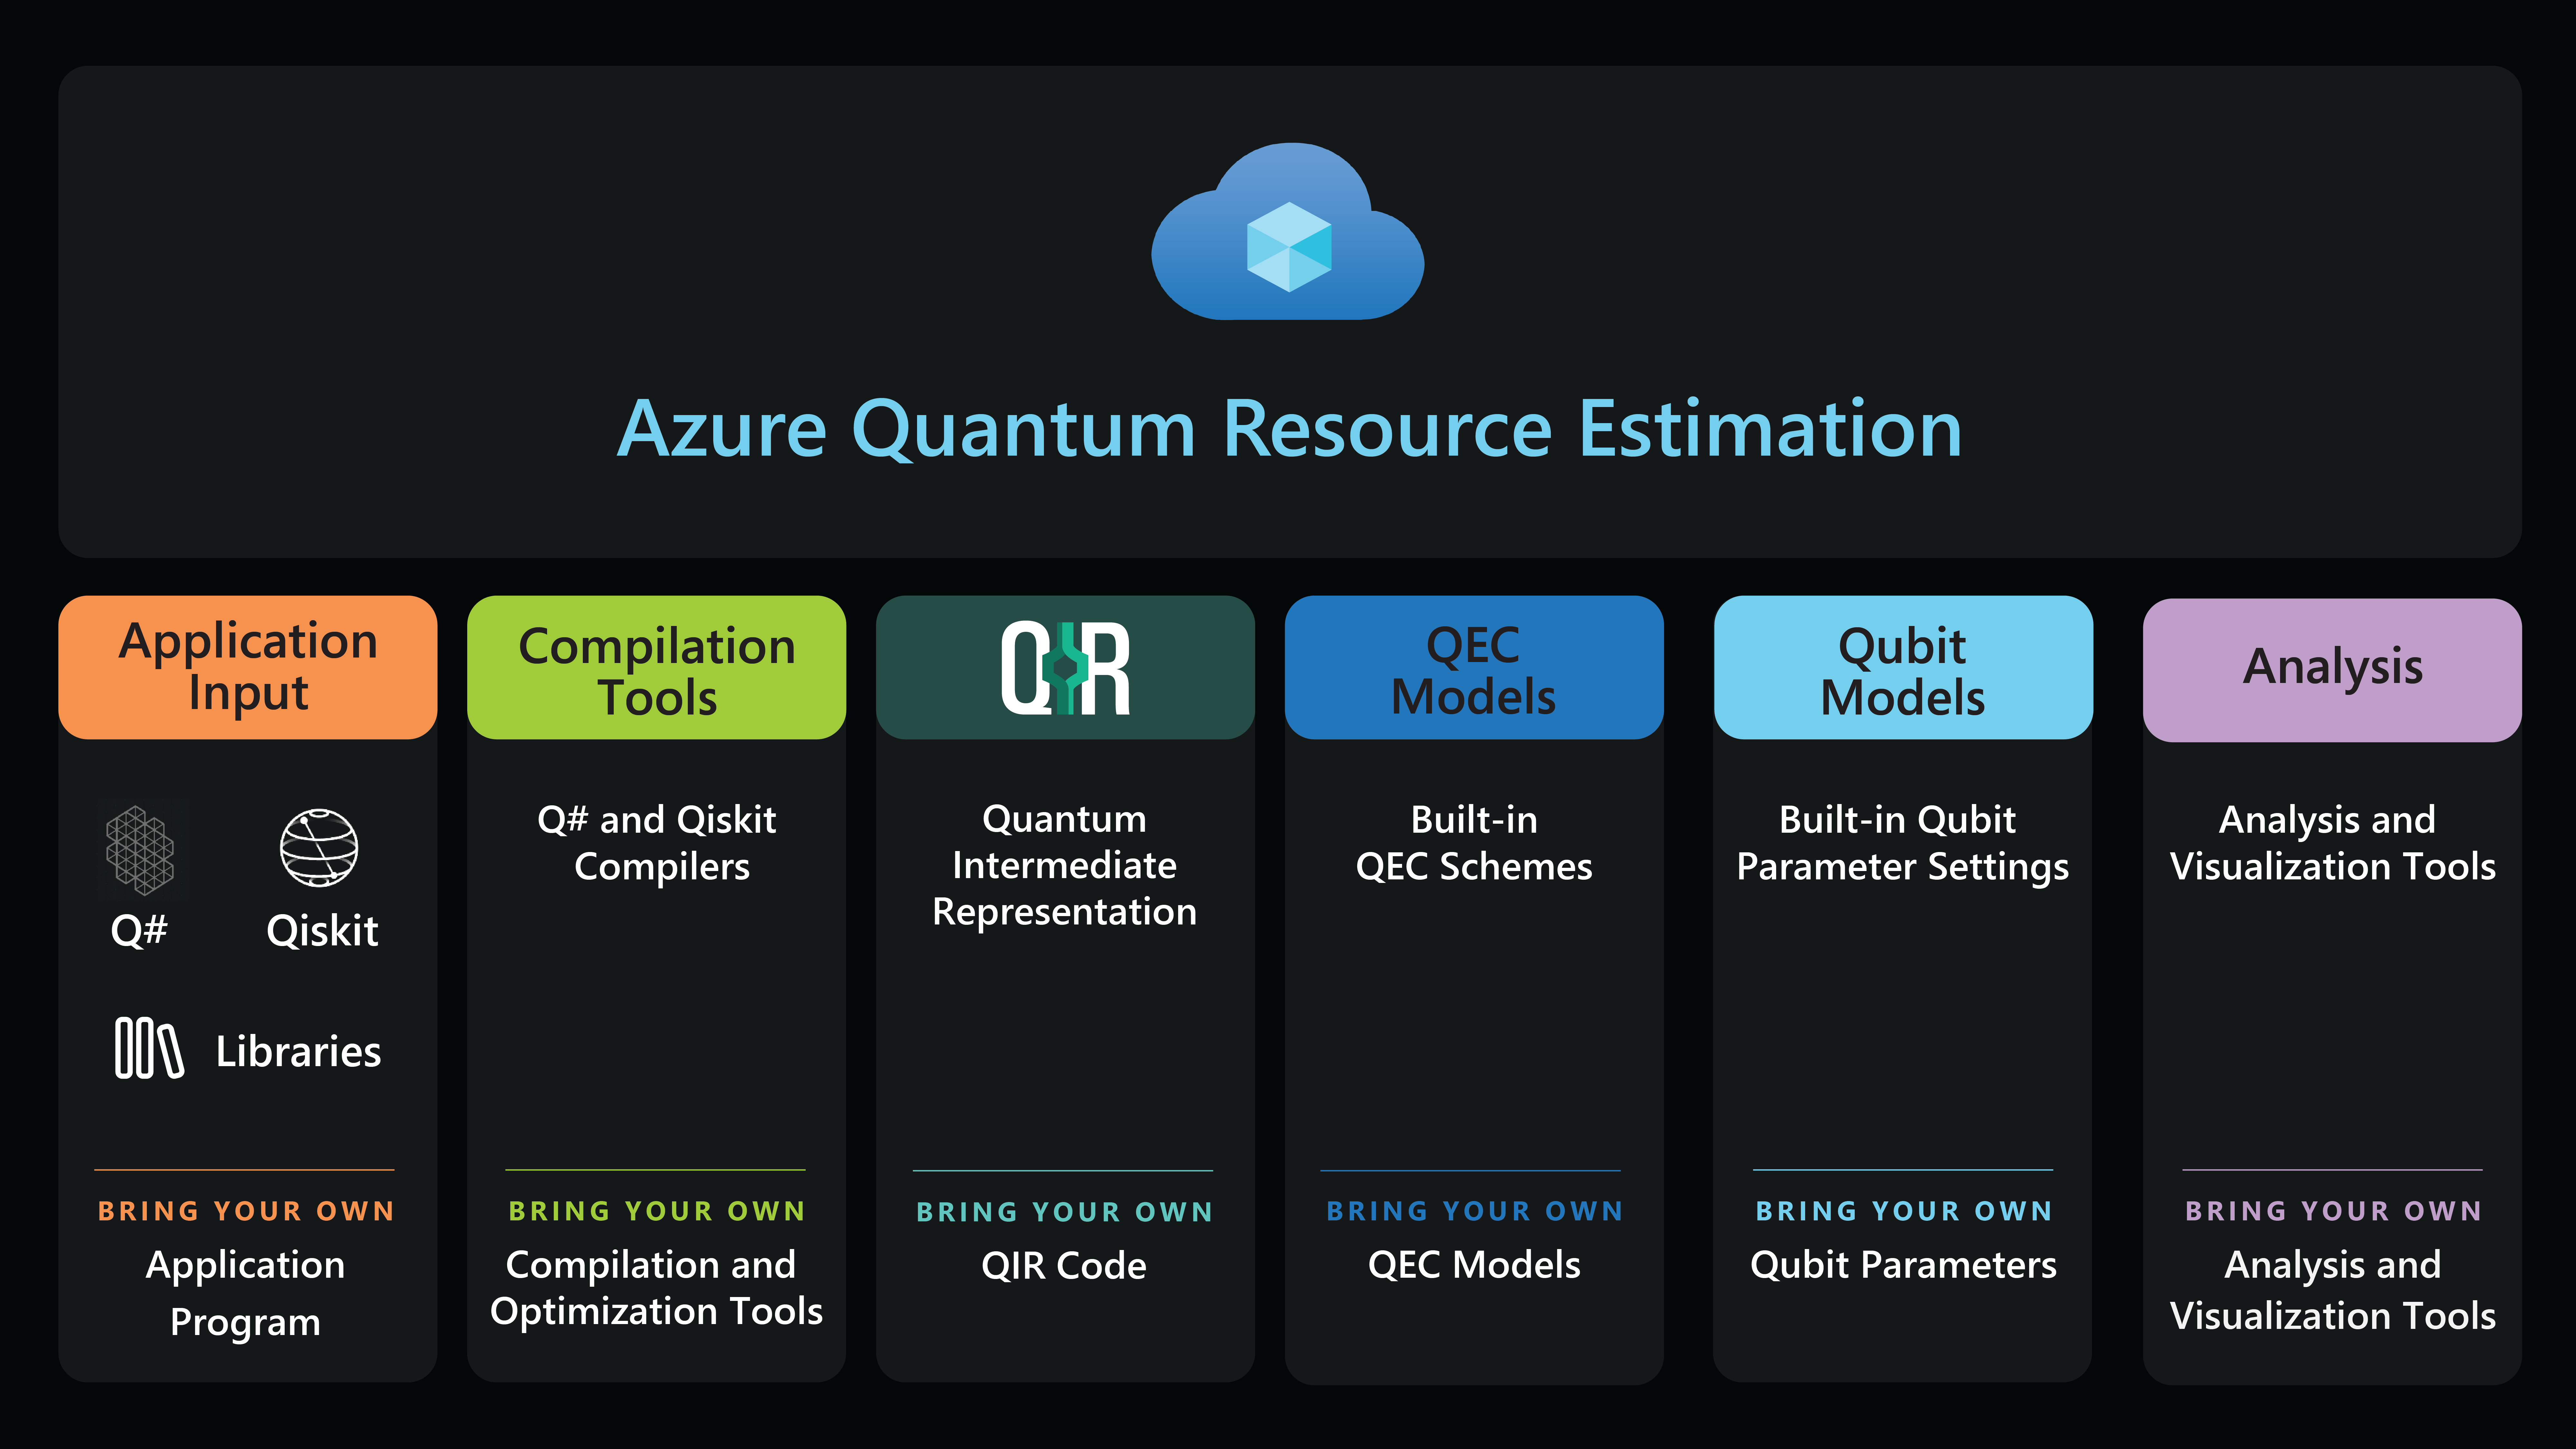 Diagram showing components provided by Resource Estimator and corresponding customizations. Provided aspects are Application Input, Compilation Tools, QIR, QEC models, Qubit models, and Analysis. Customer can bring Application Program, Compilation or Optimization Tools, QIR Code, QEC models, Qubit parameters, and Analysis and Visualization Tools.